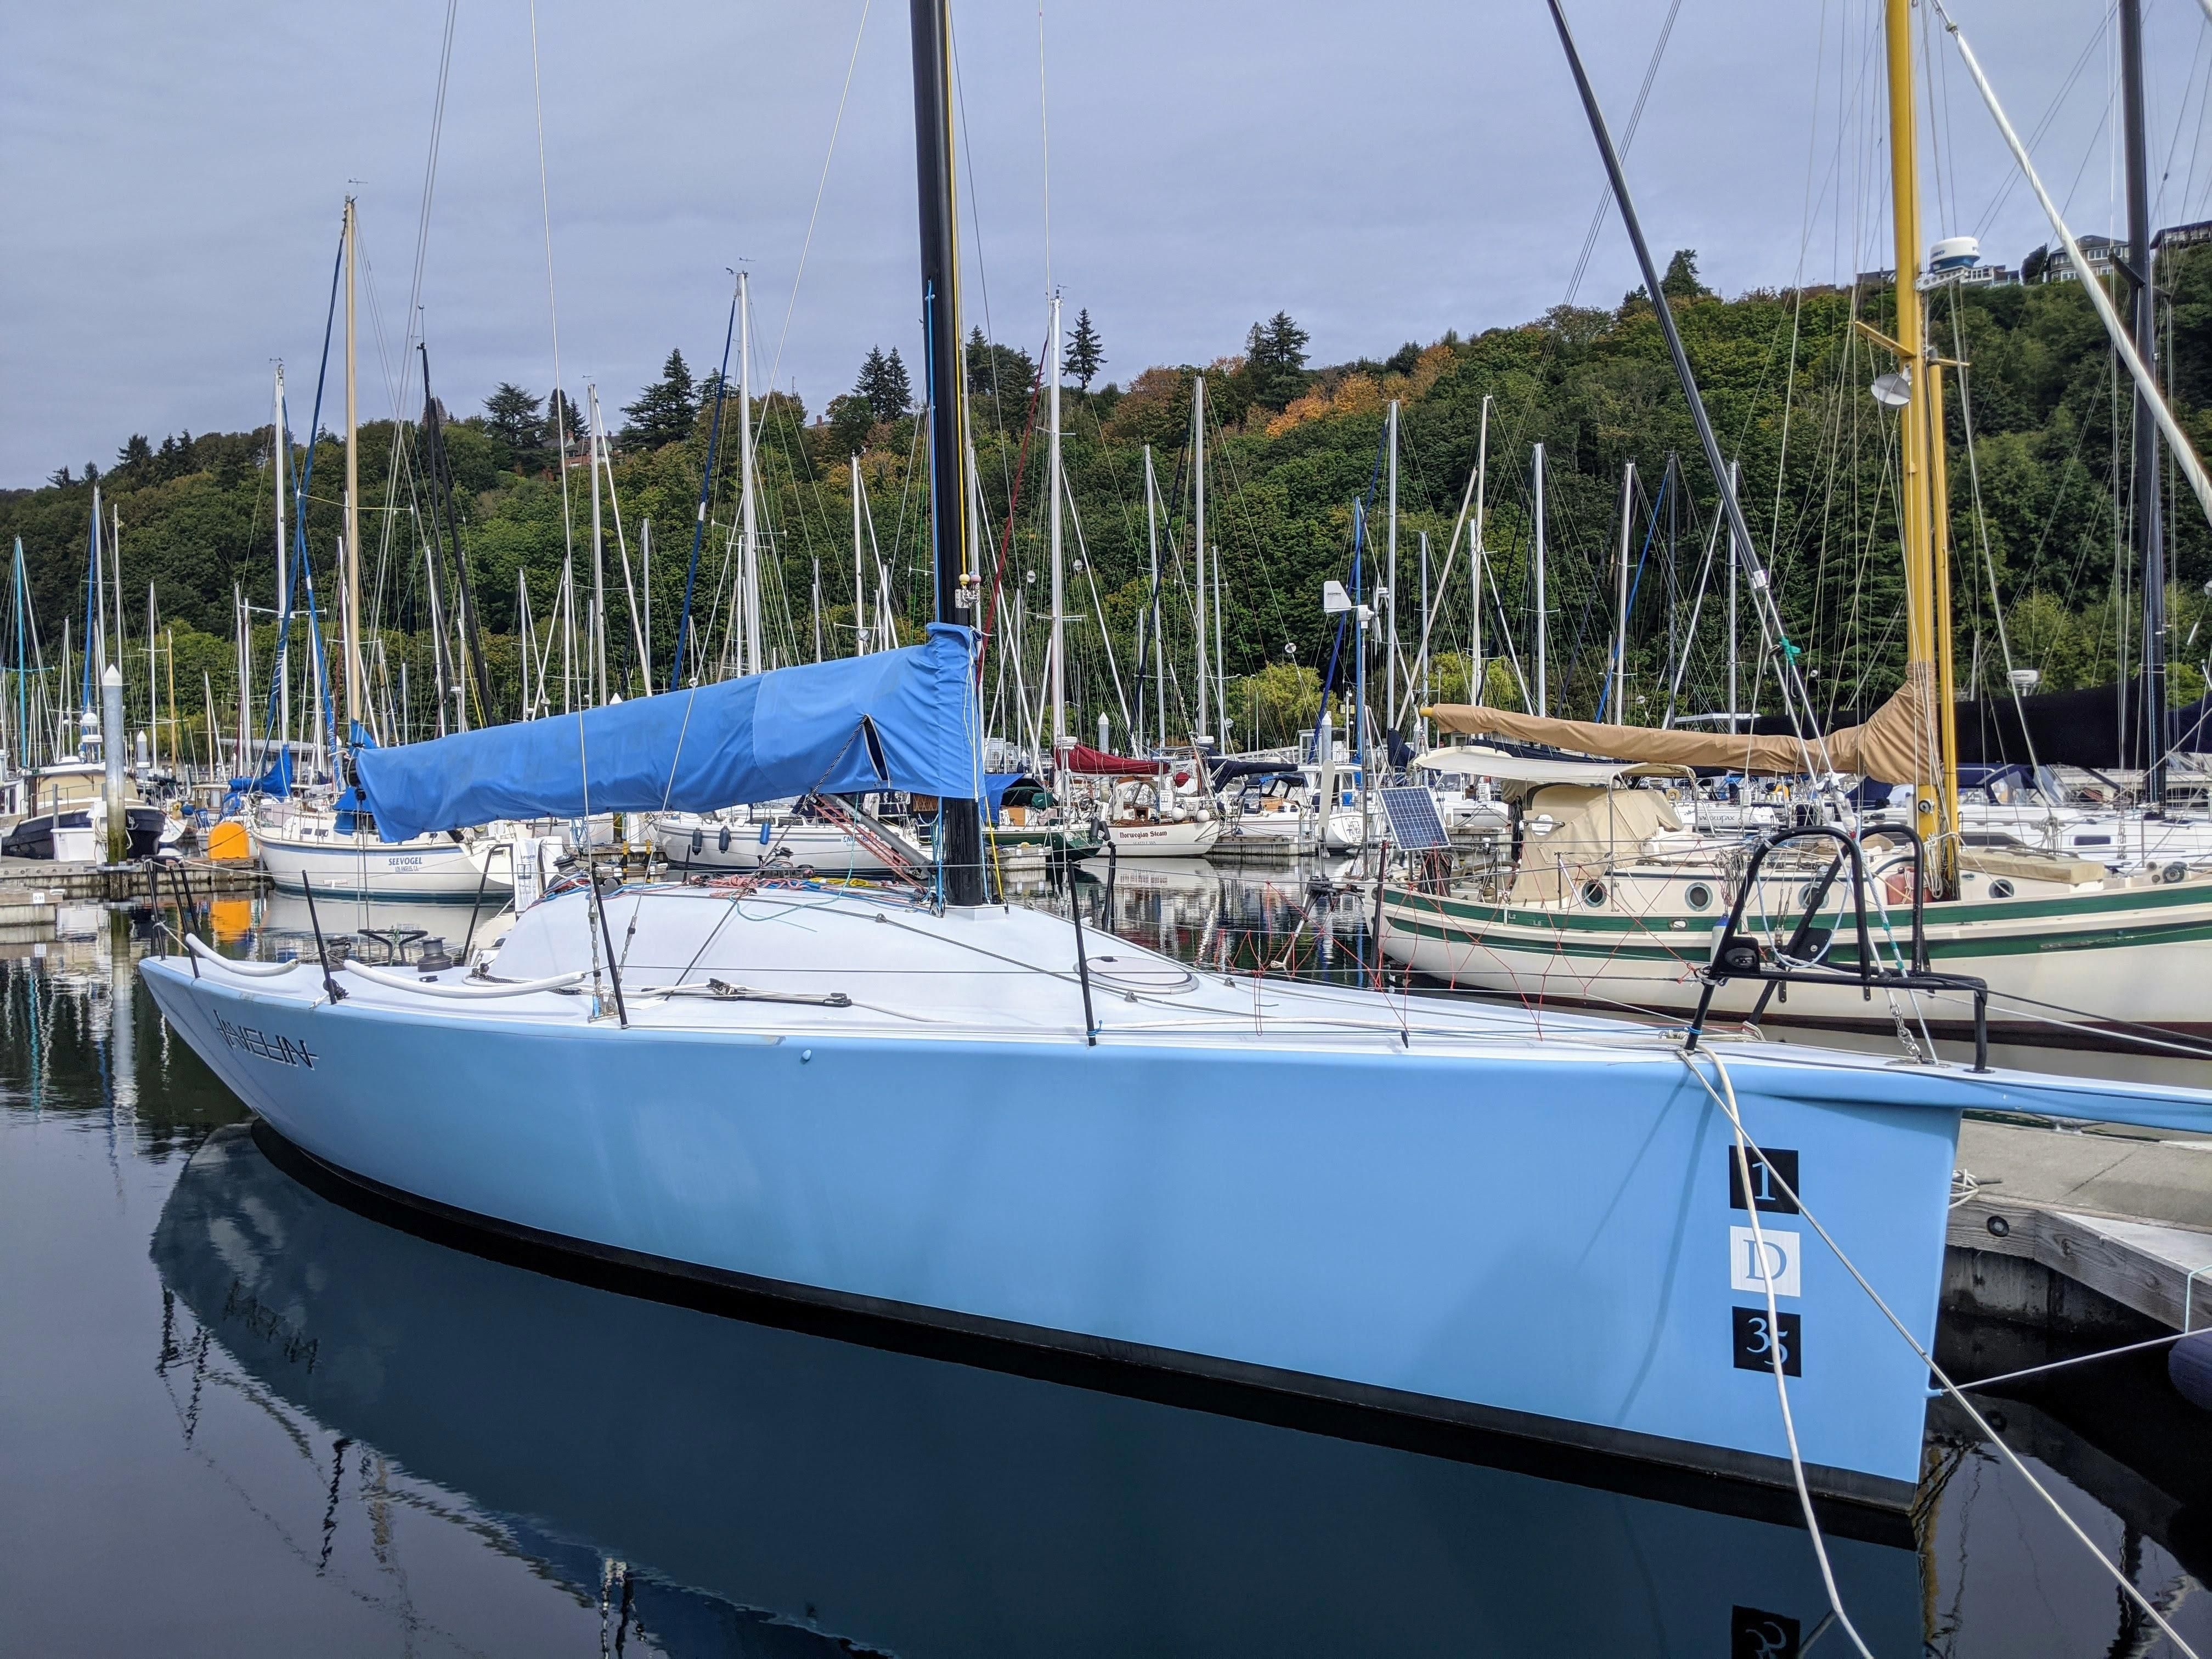 1d35 sailboat for sale